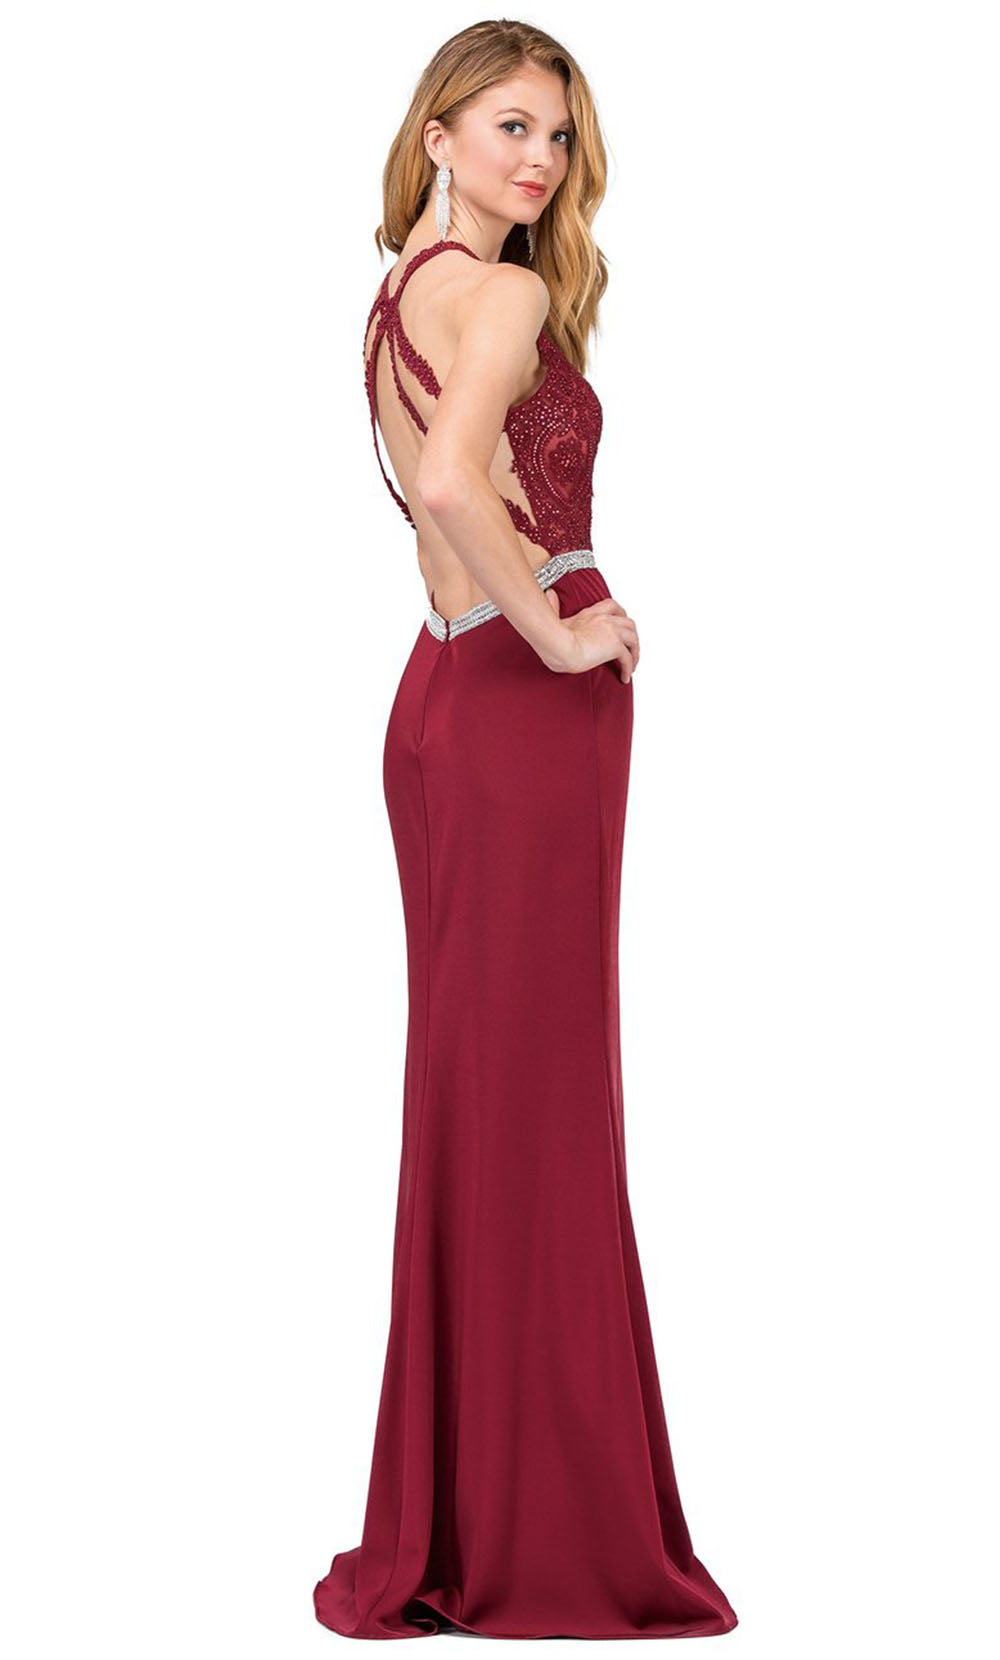 Dancing Queen - 9702 Embroidered Halter Sheath Dress With Slit In Red